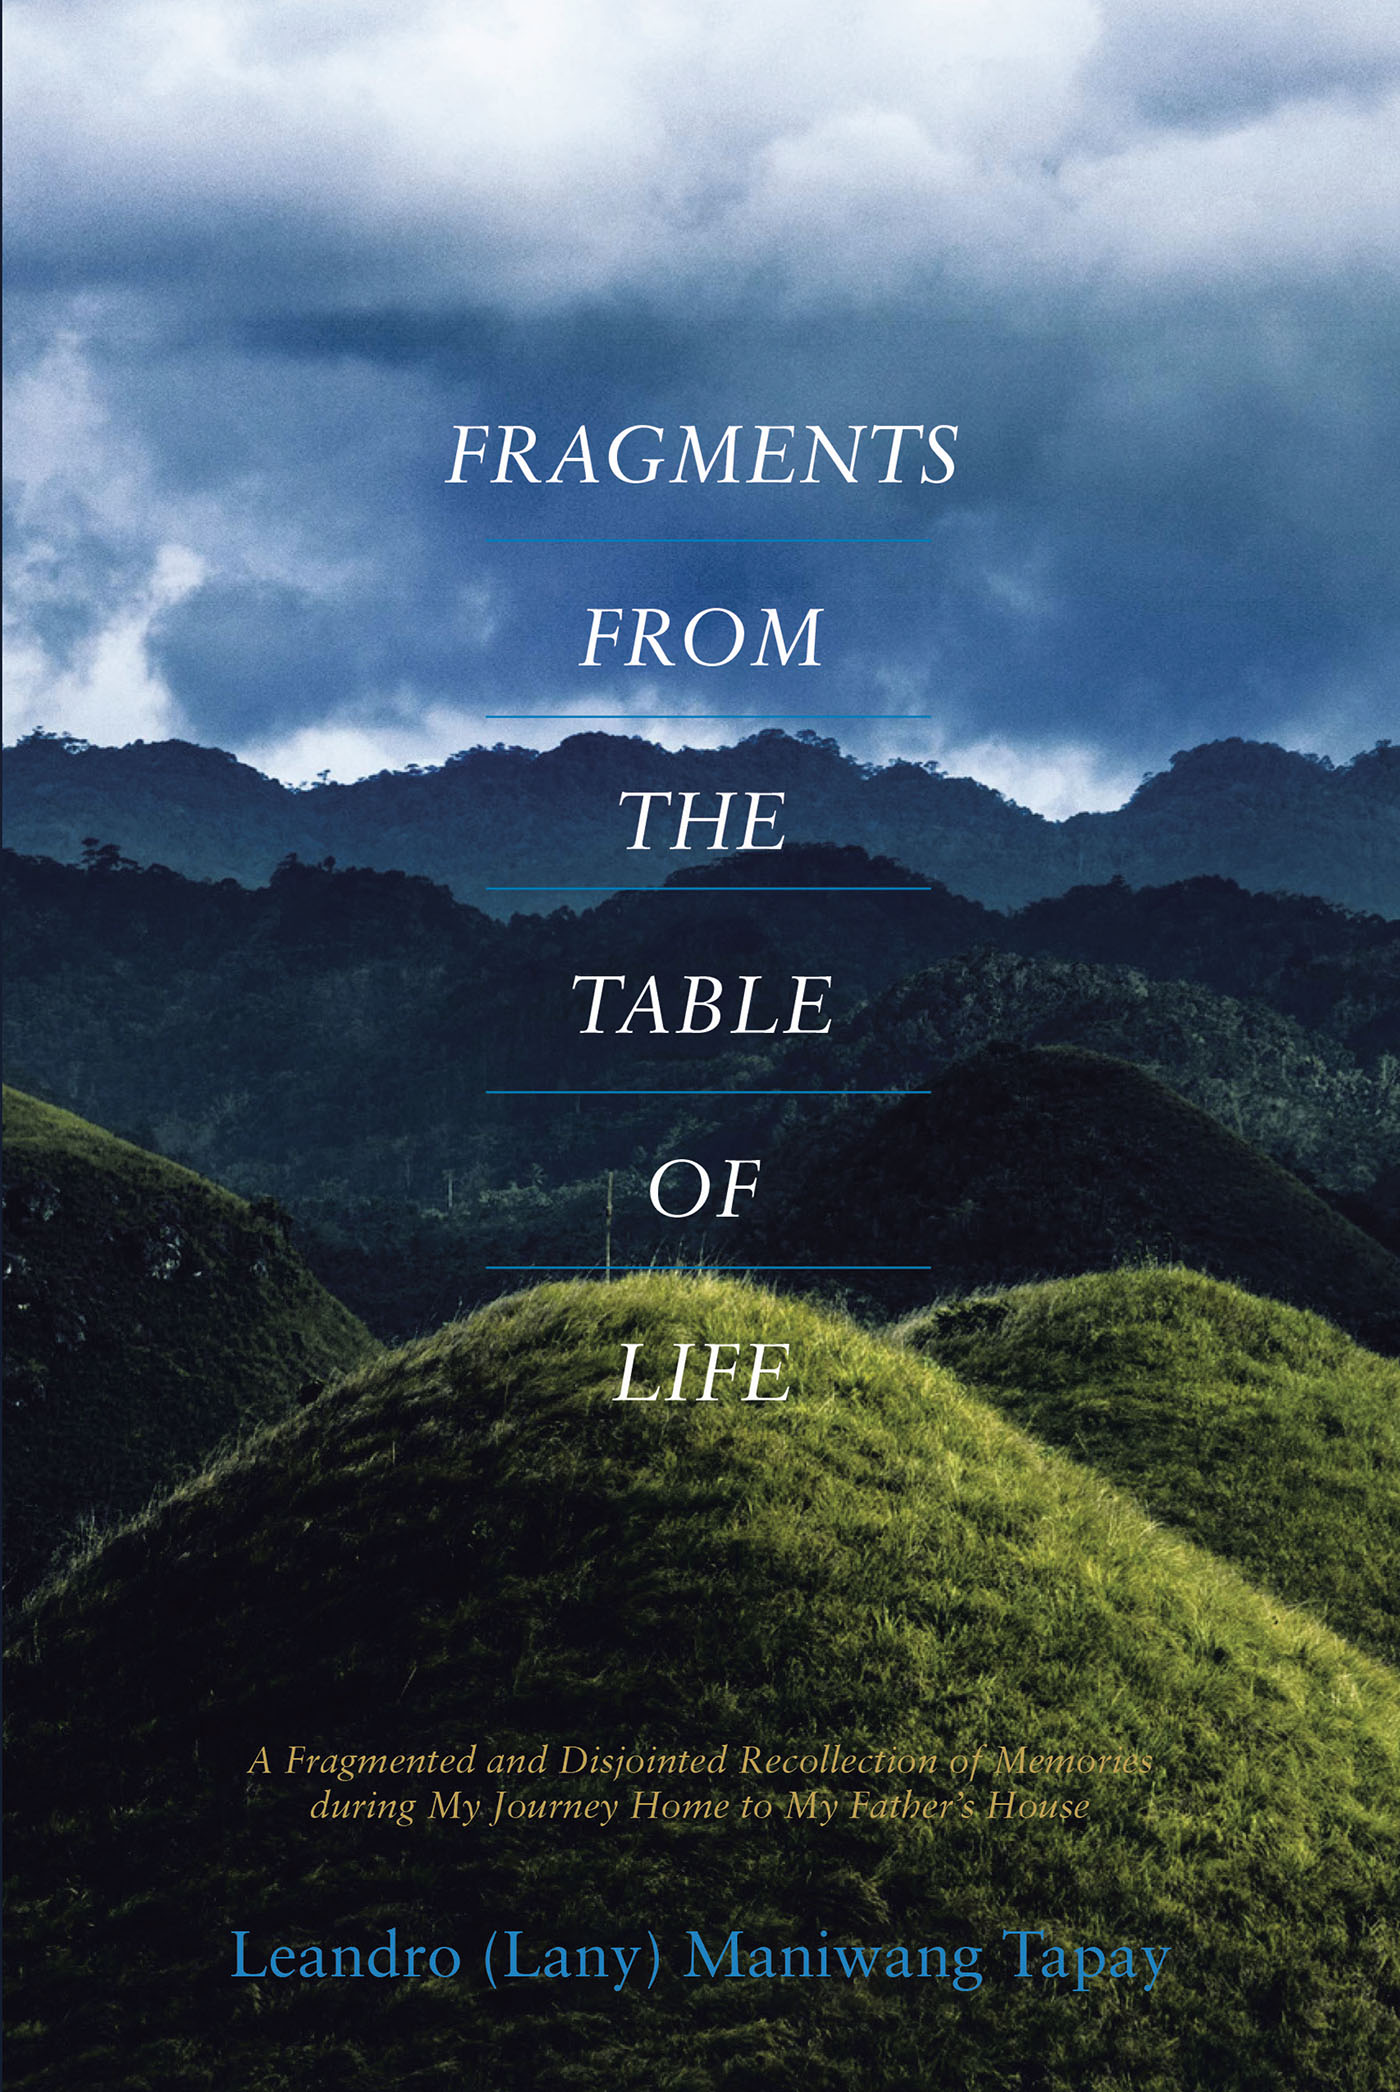 Leandro (Lany) Maniwang Tapay’s Newly Released “FRAGMENTS FROM THE TABLE OF LIFE” is an Intriguing Memoir That Explores the Life of a Dedicated Educator